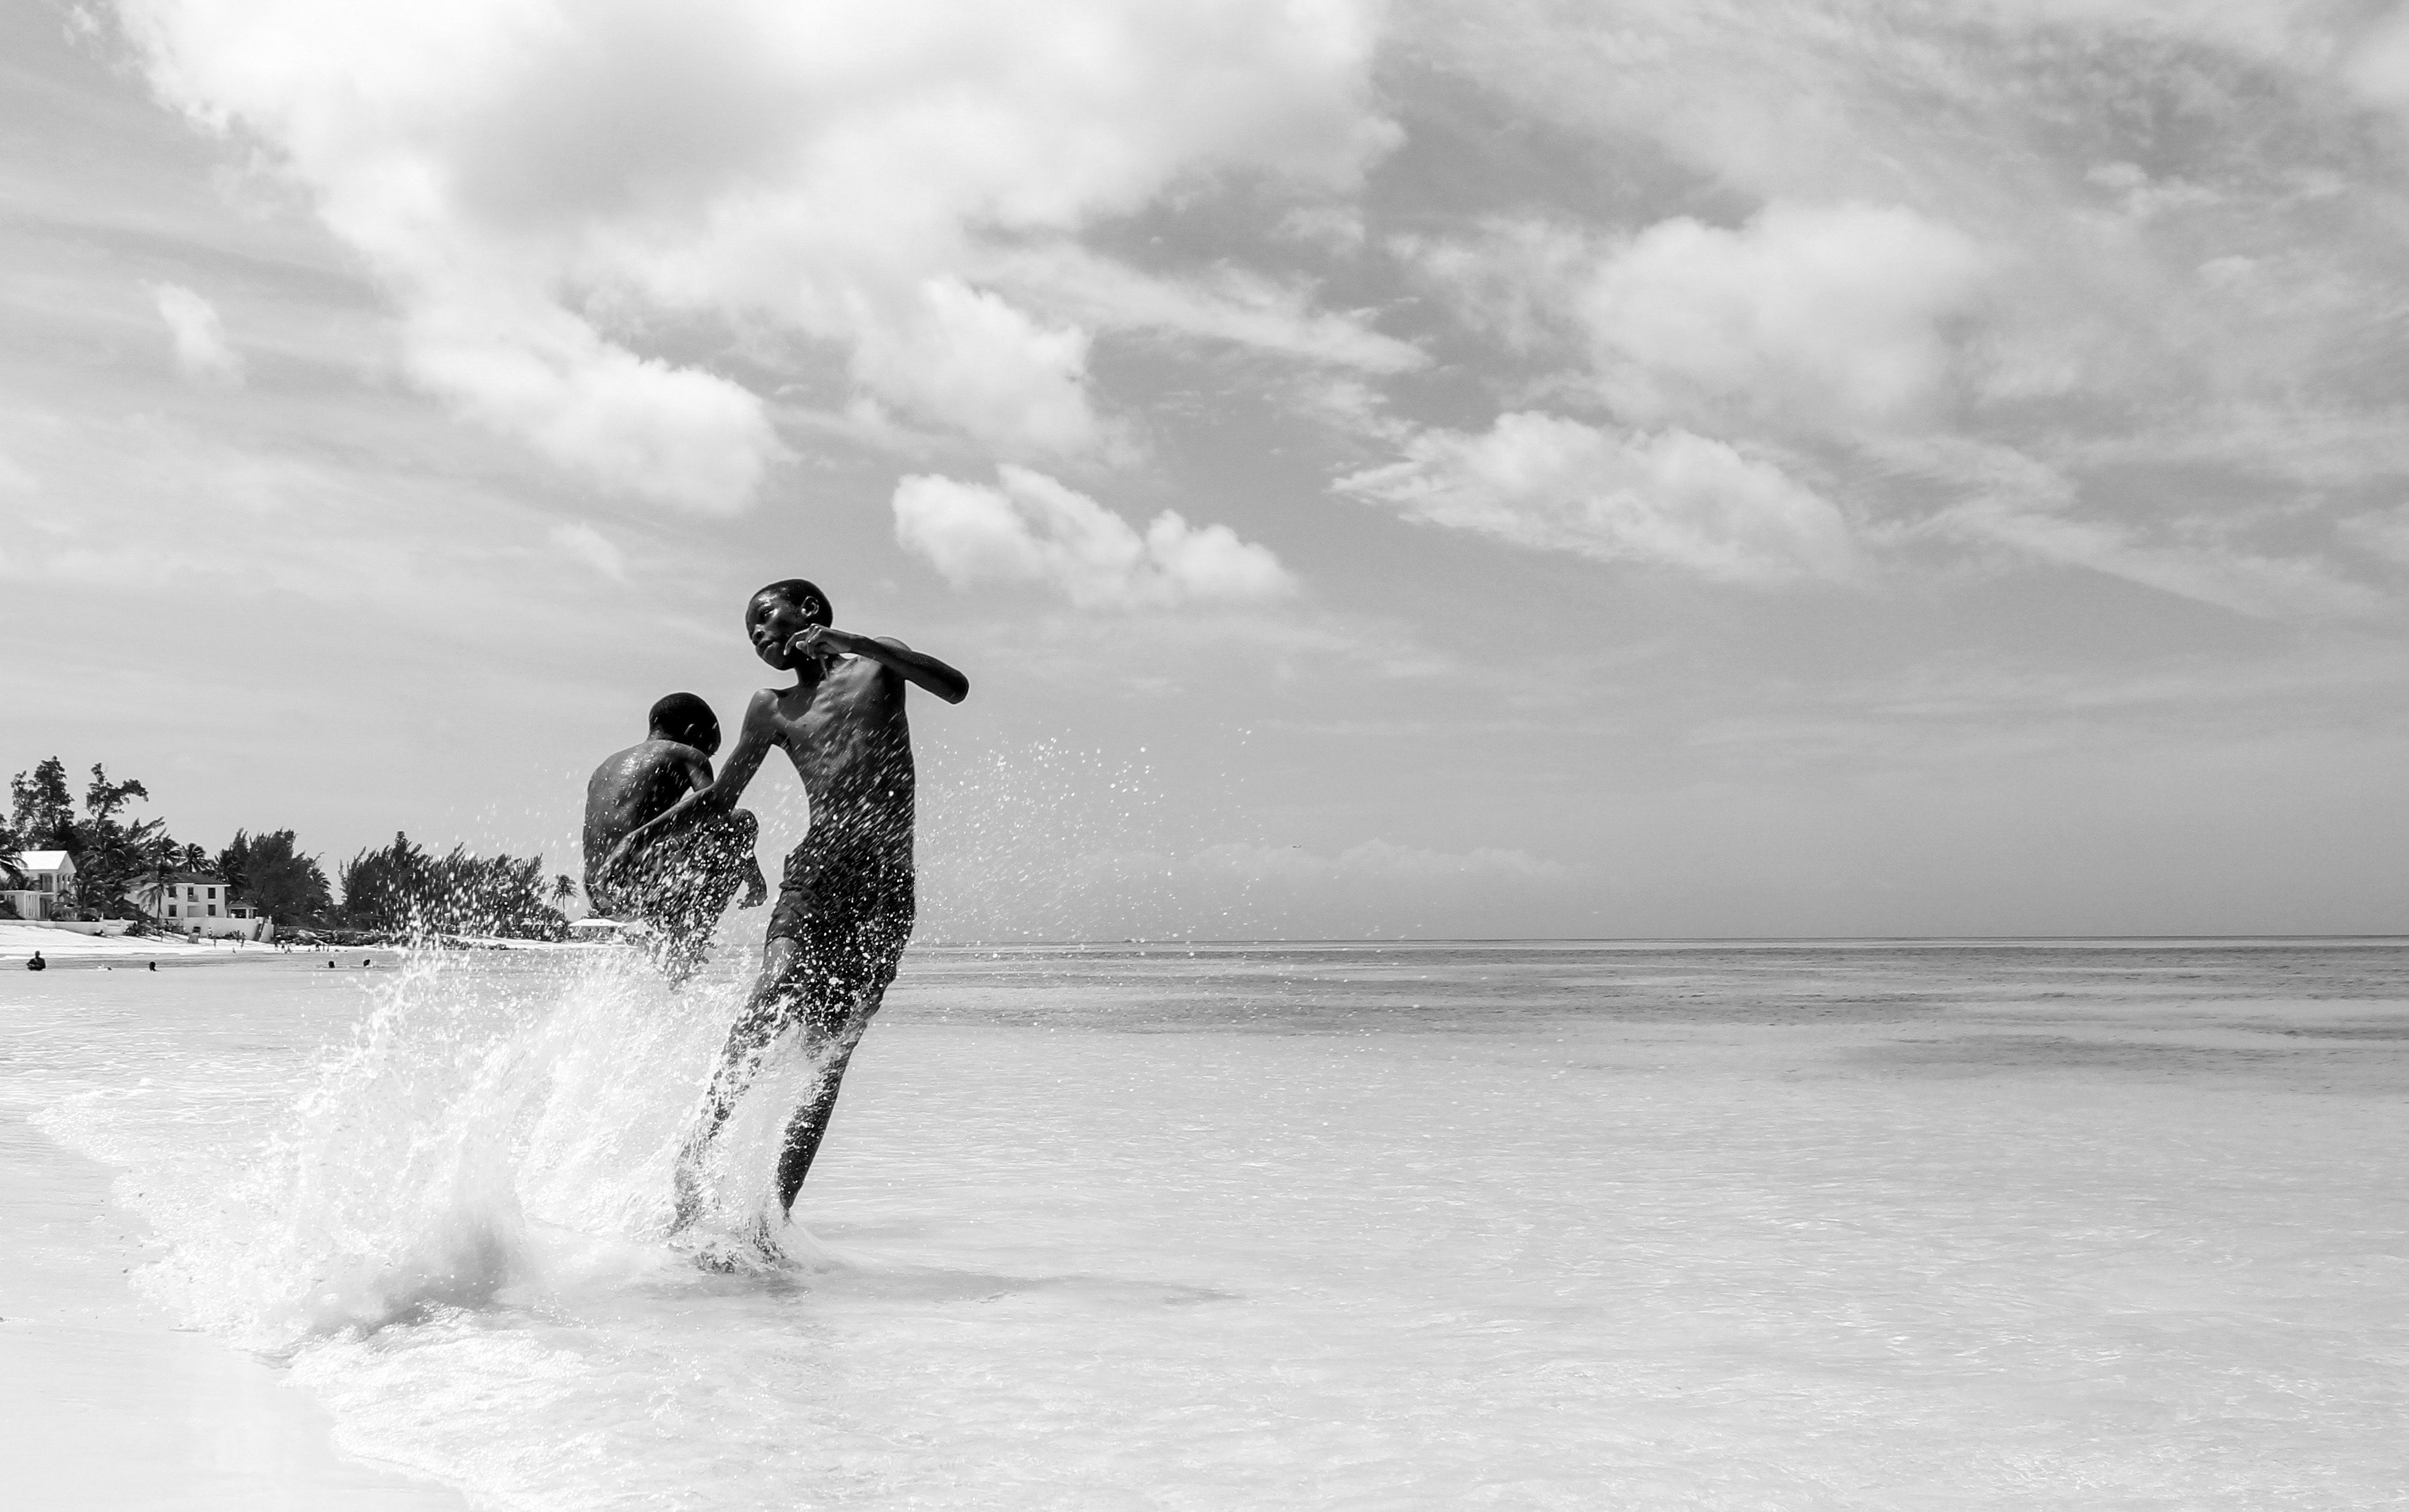 Bahamas Tales: Limited edition photography by Alessandro 